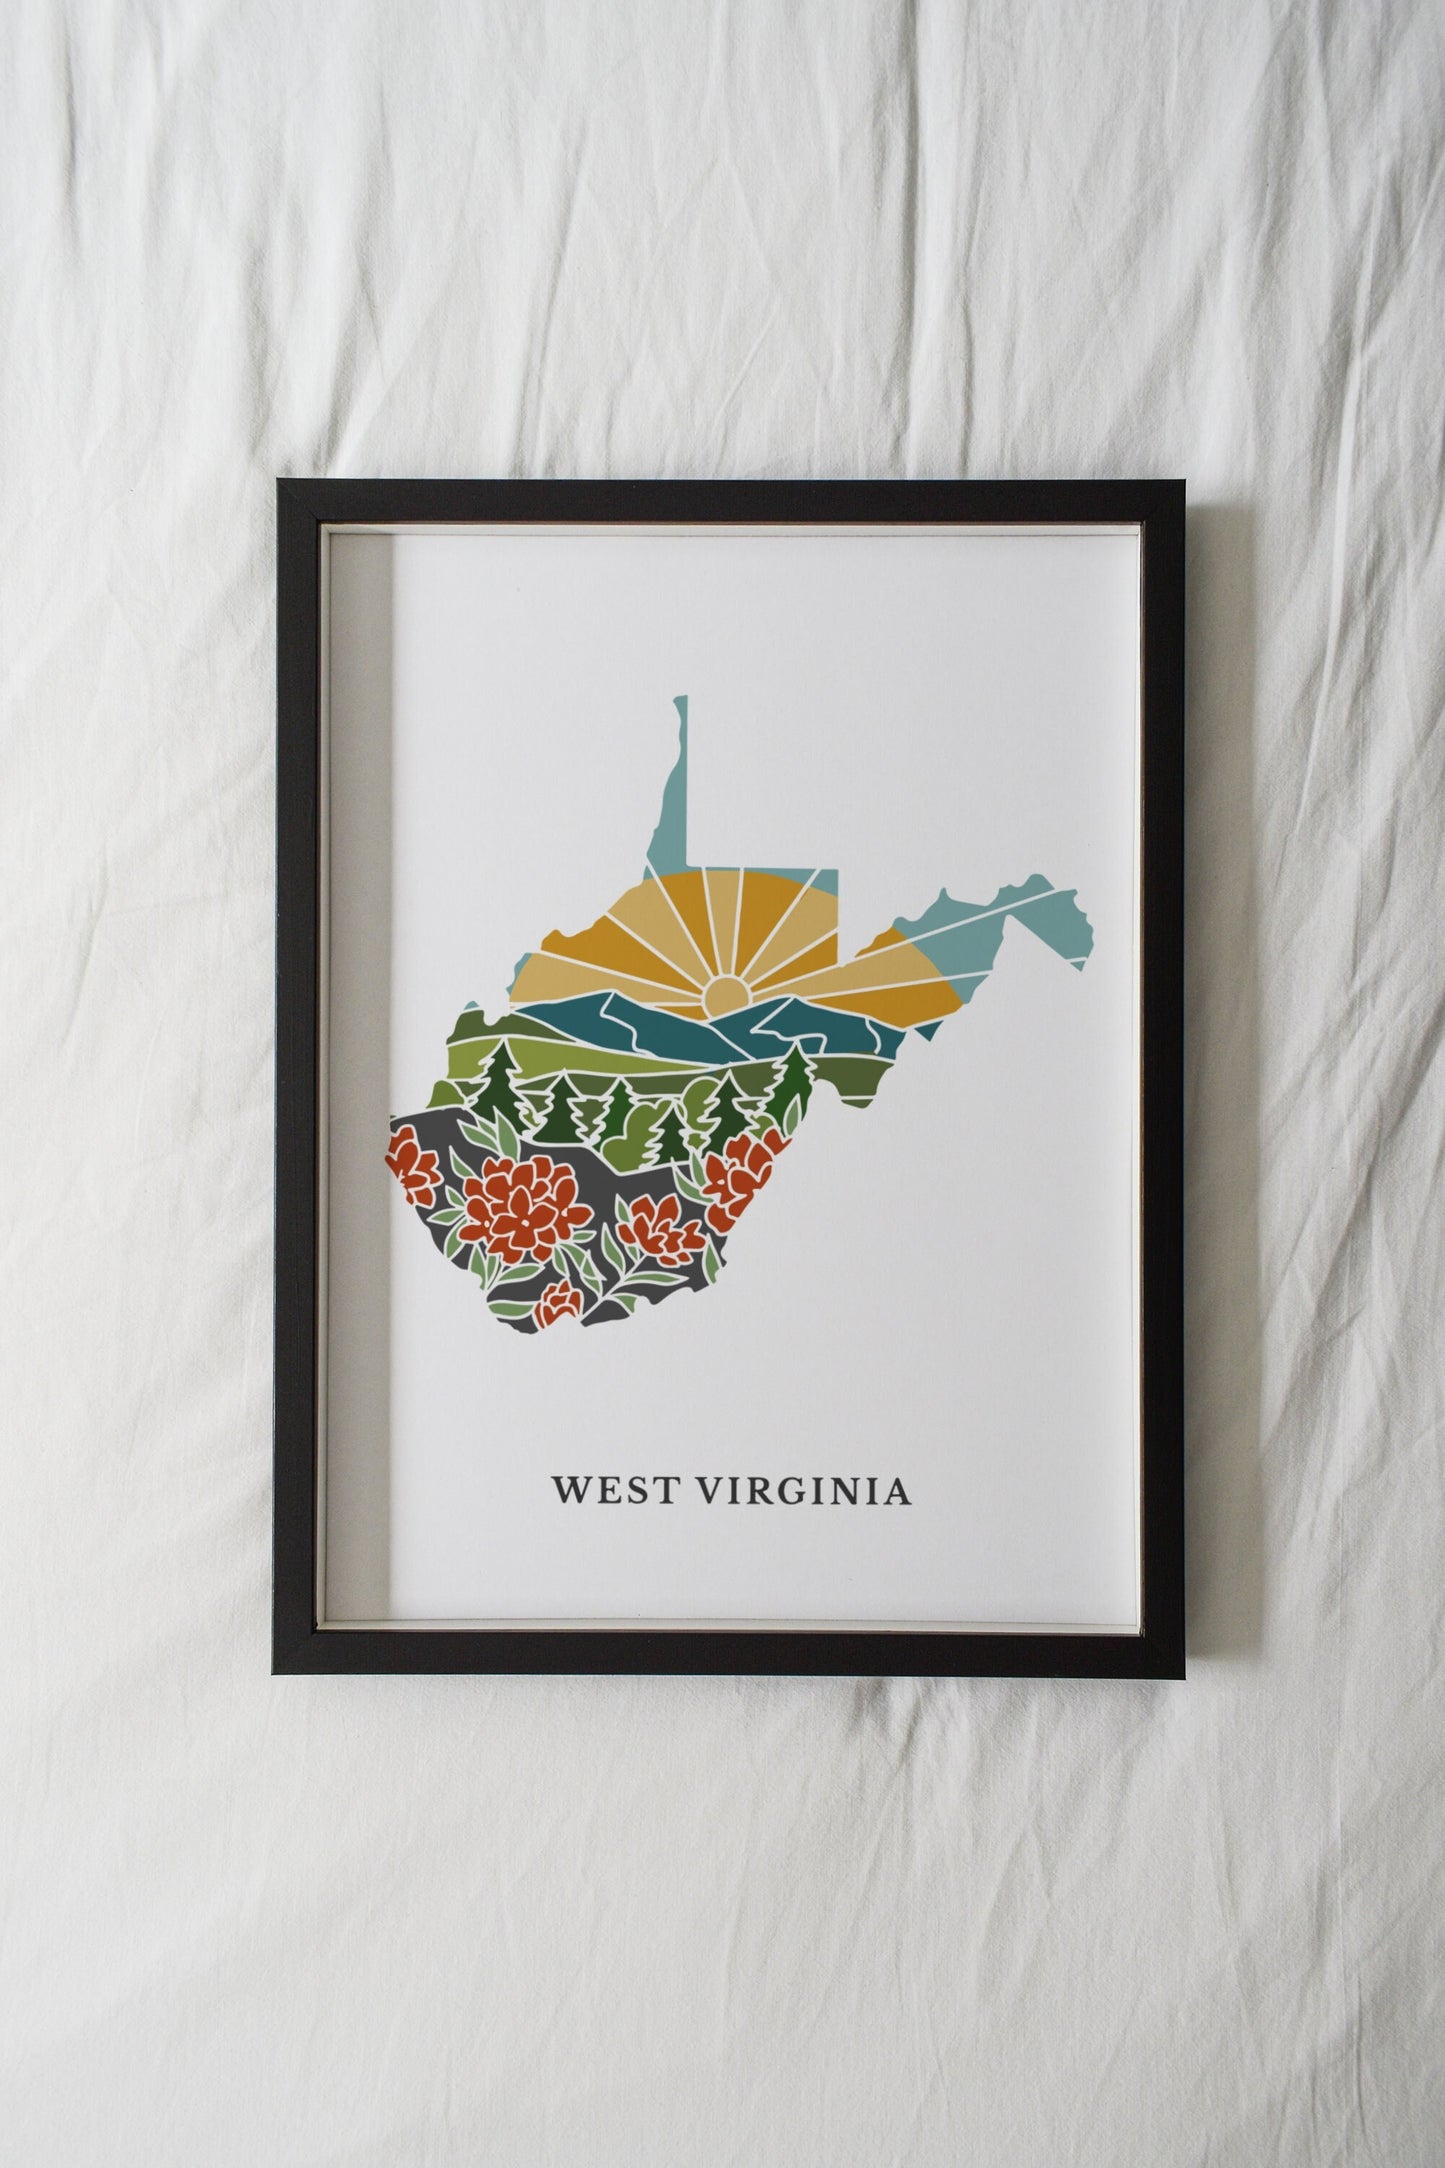 West Virginia Physical Art Print | State Wall Art | 5x7, 8x10, 11x14, 16x20 Archival Art Print | West Virginia Illustrated Poster